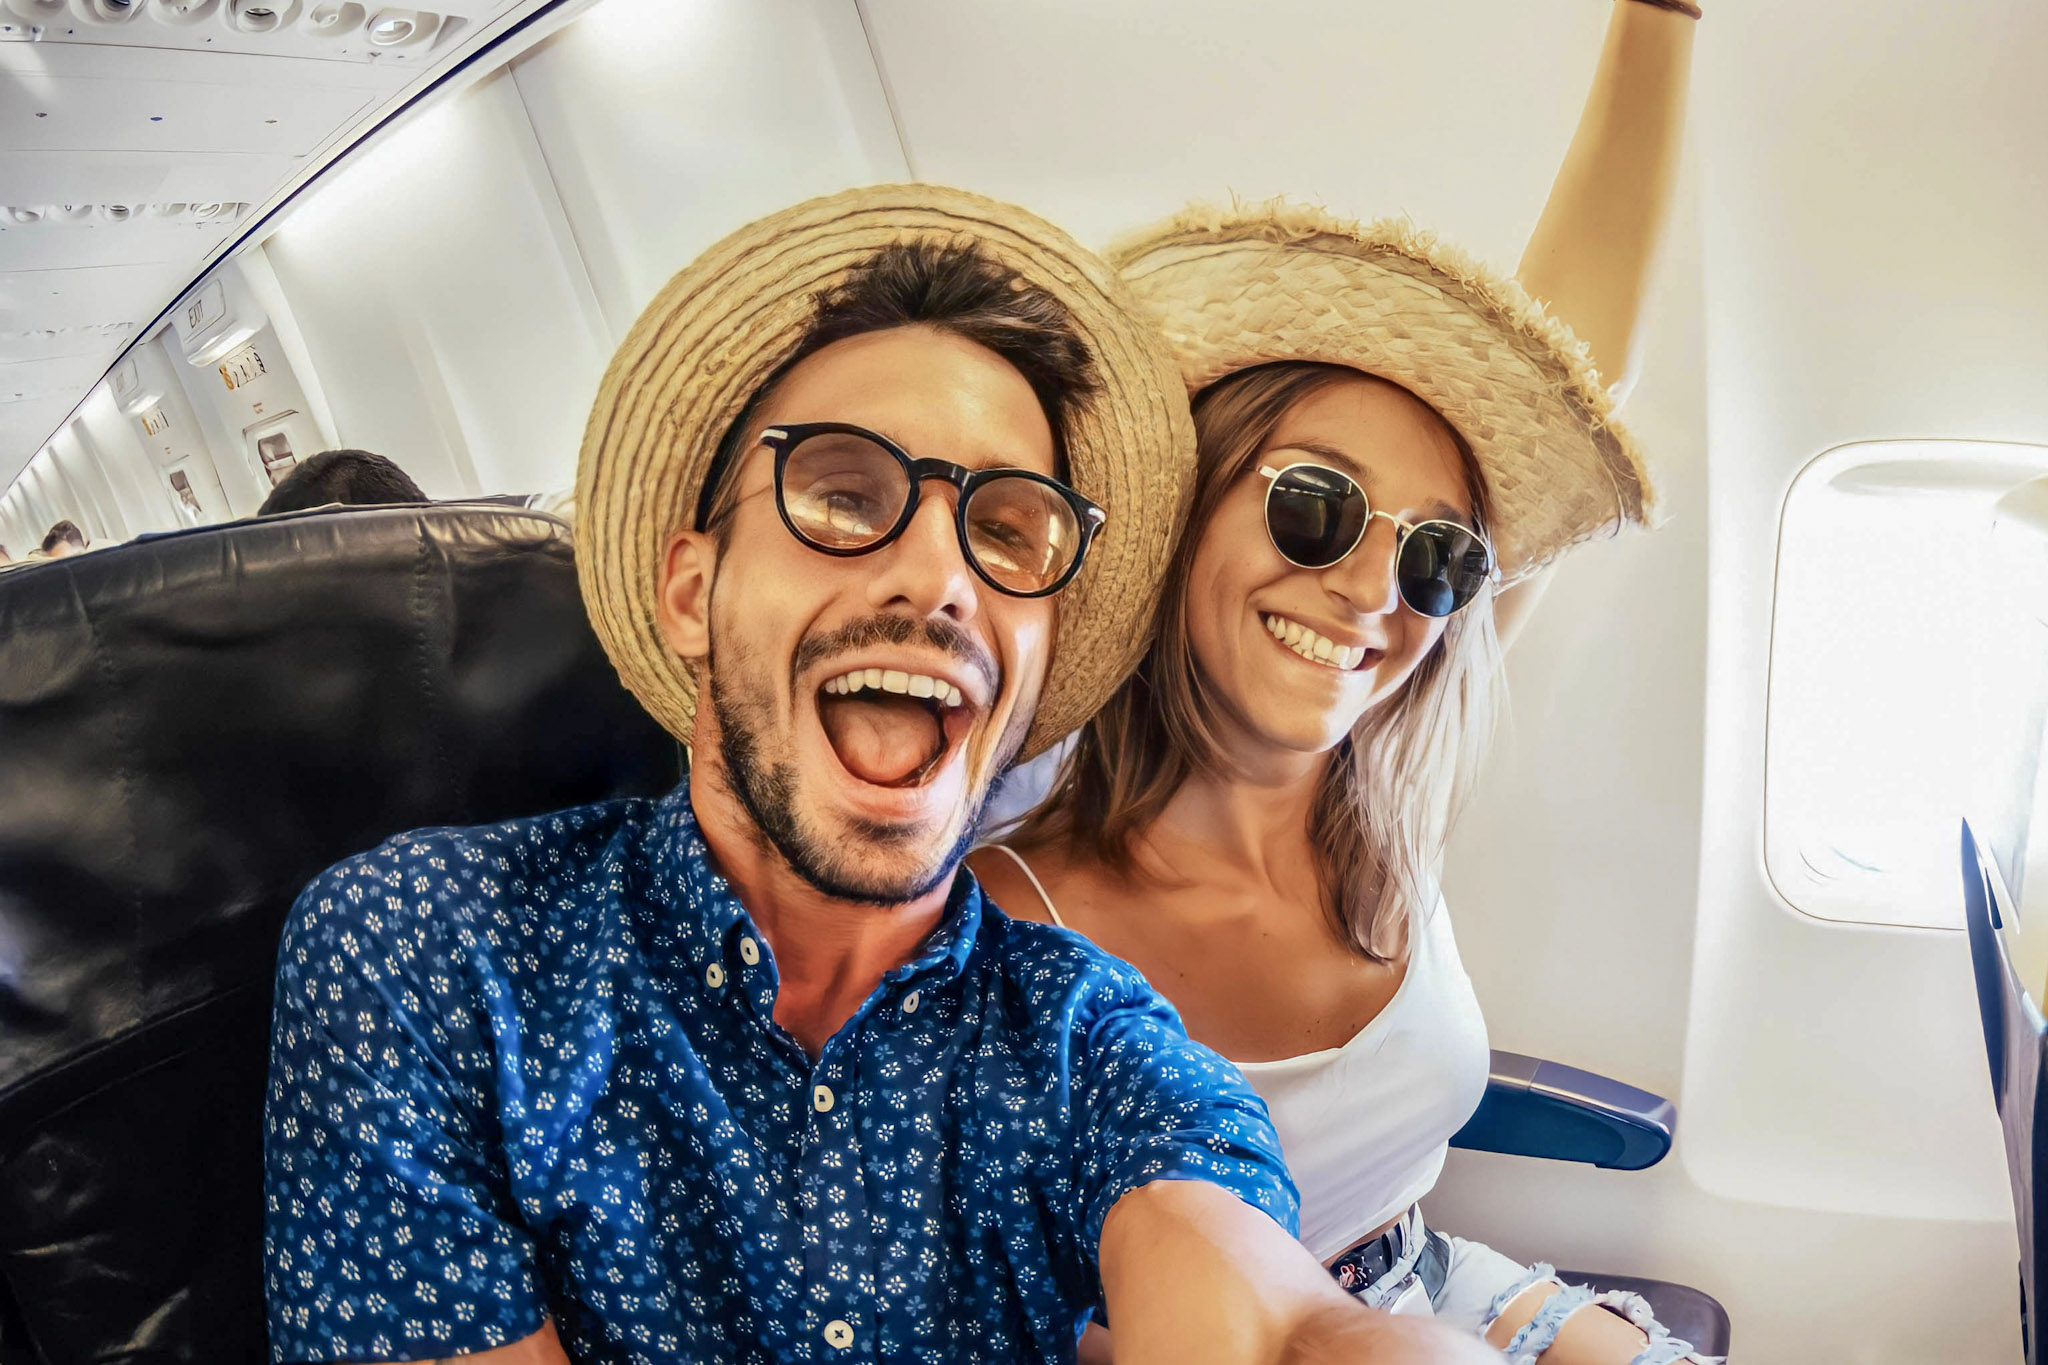 stock photo of a tourist couple taking a selfie in an airplane cabin